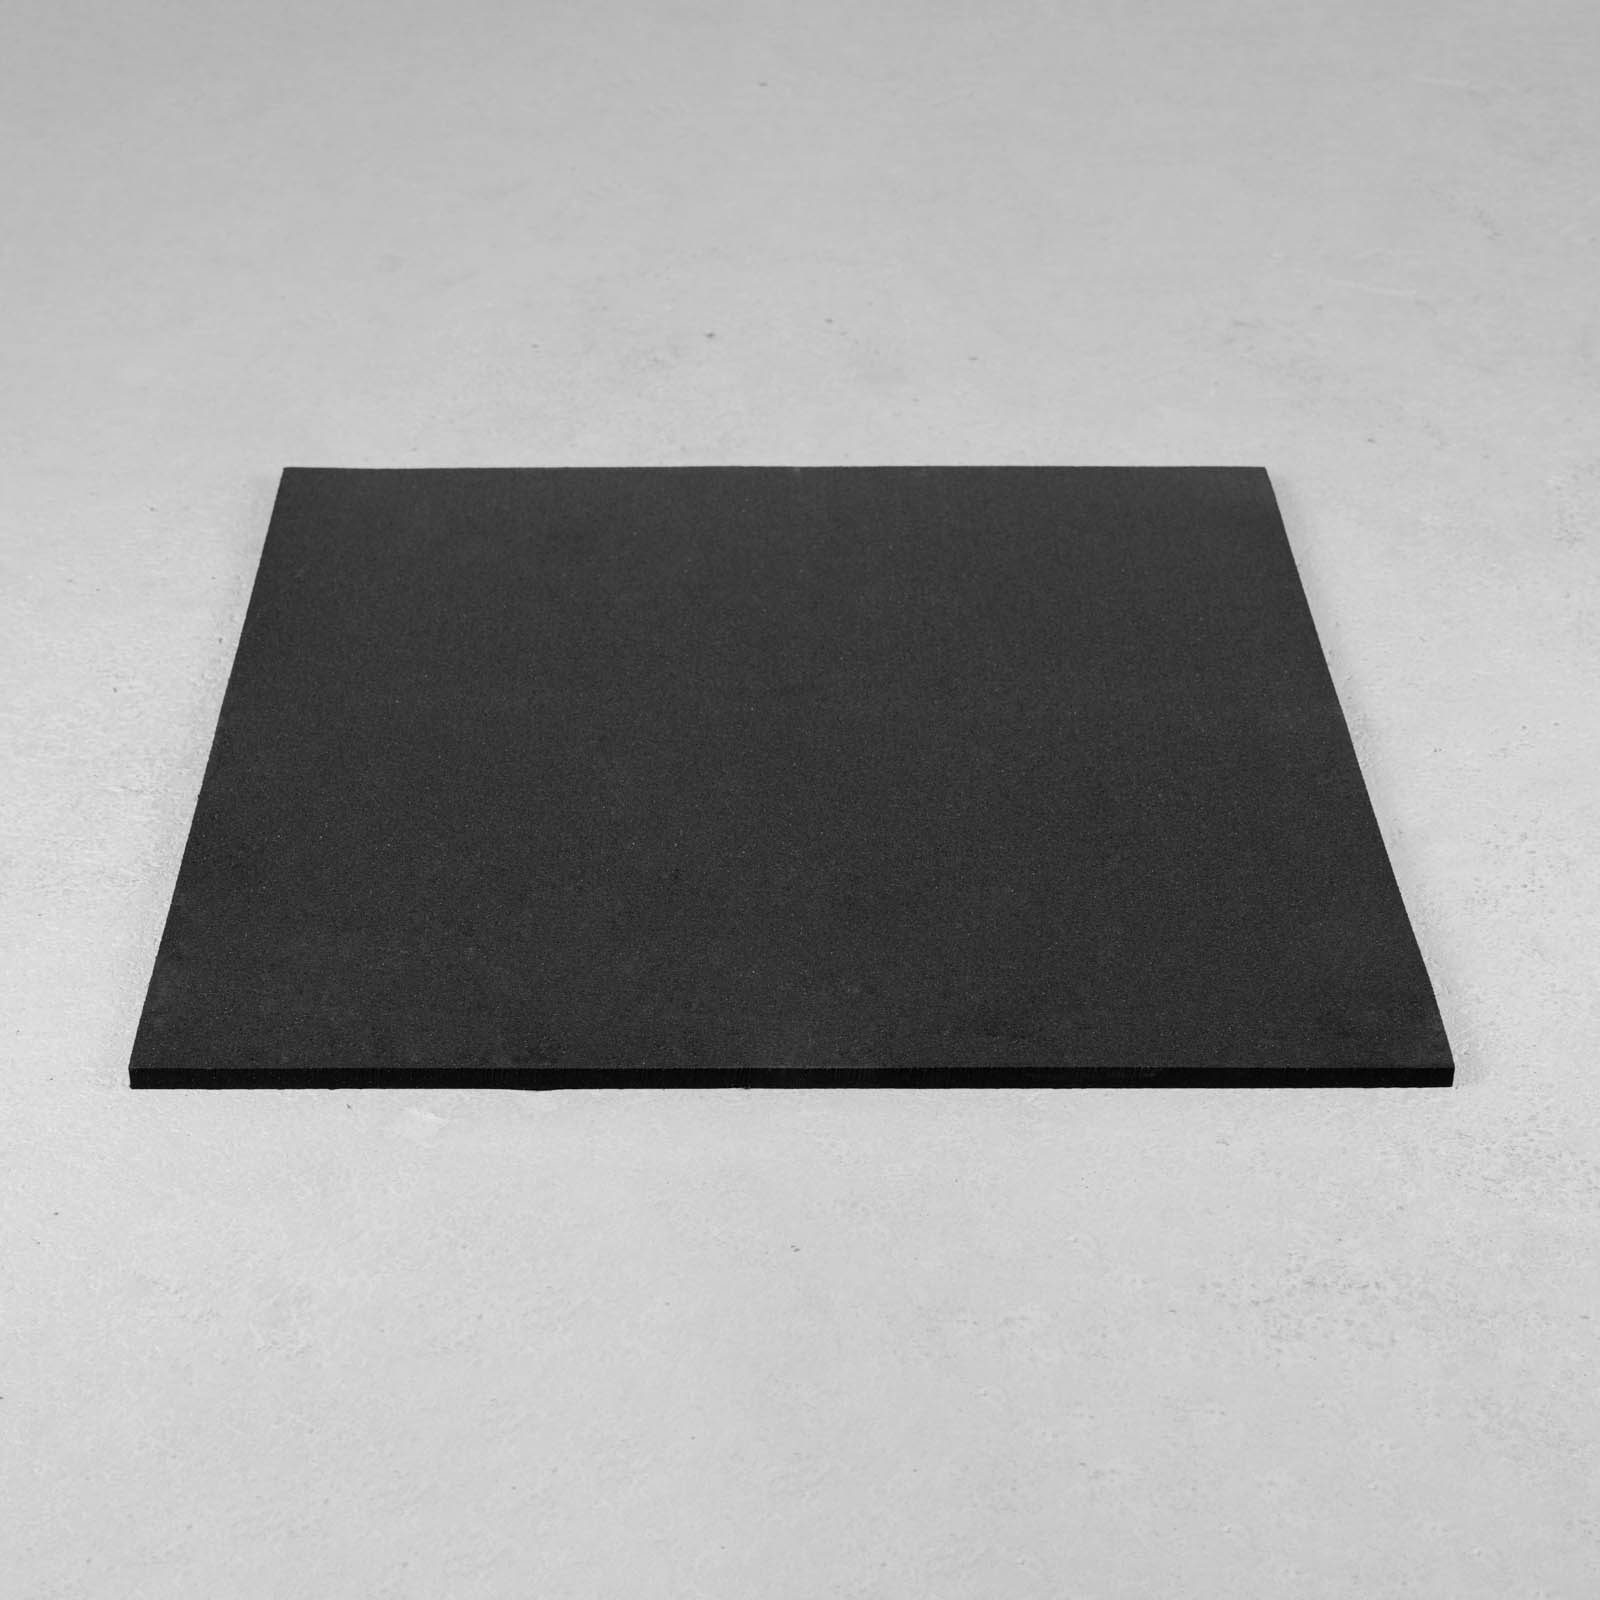 Used - Royal Rubber Floor 100x100 1.5cm